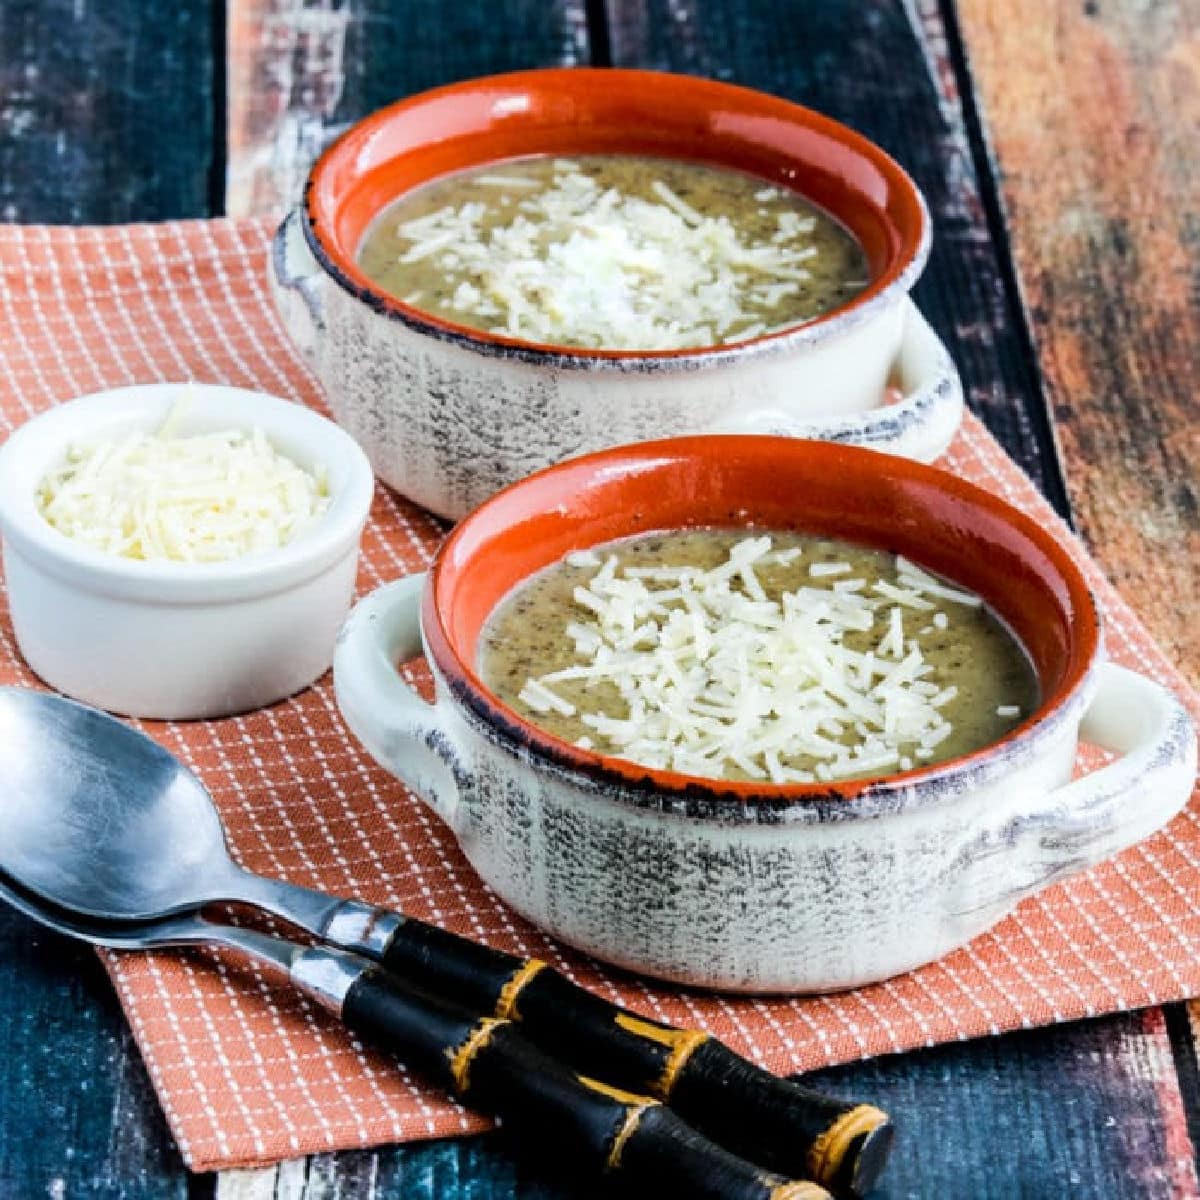 Instant Pot Cauliflower Mushroom Soup shown in two bowls with spoons and Parmesan.